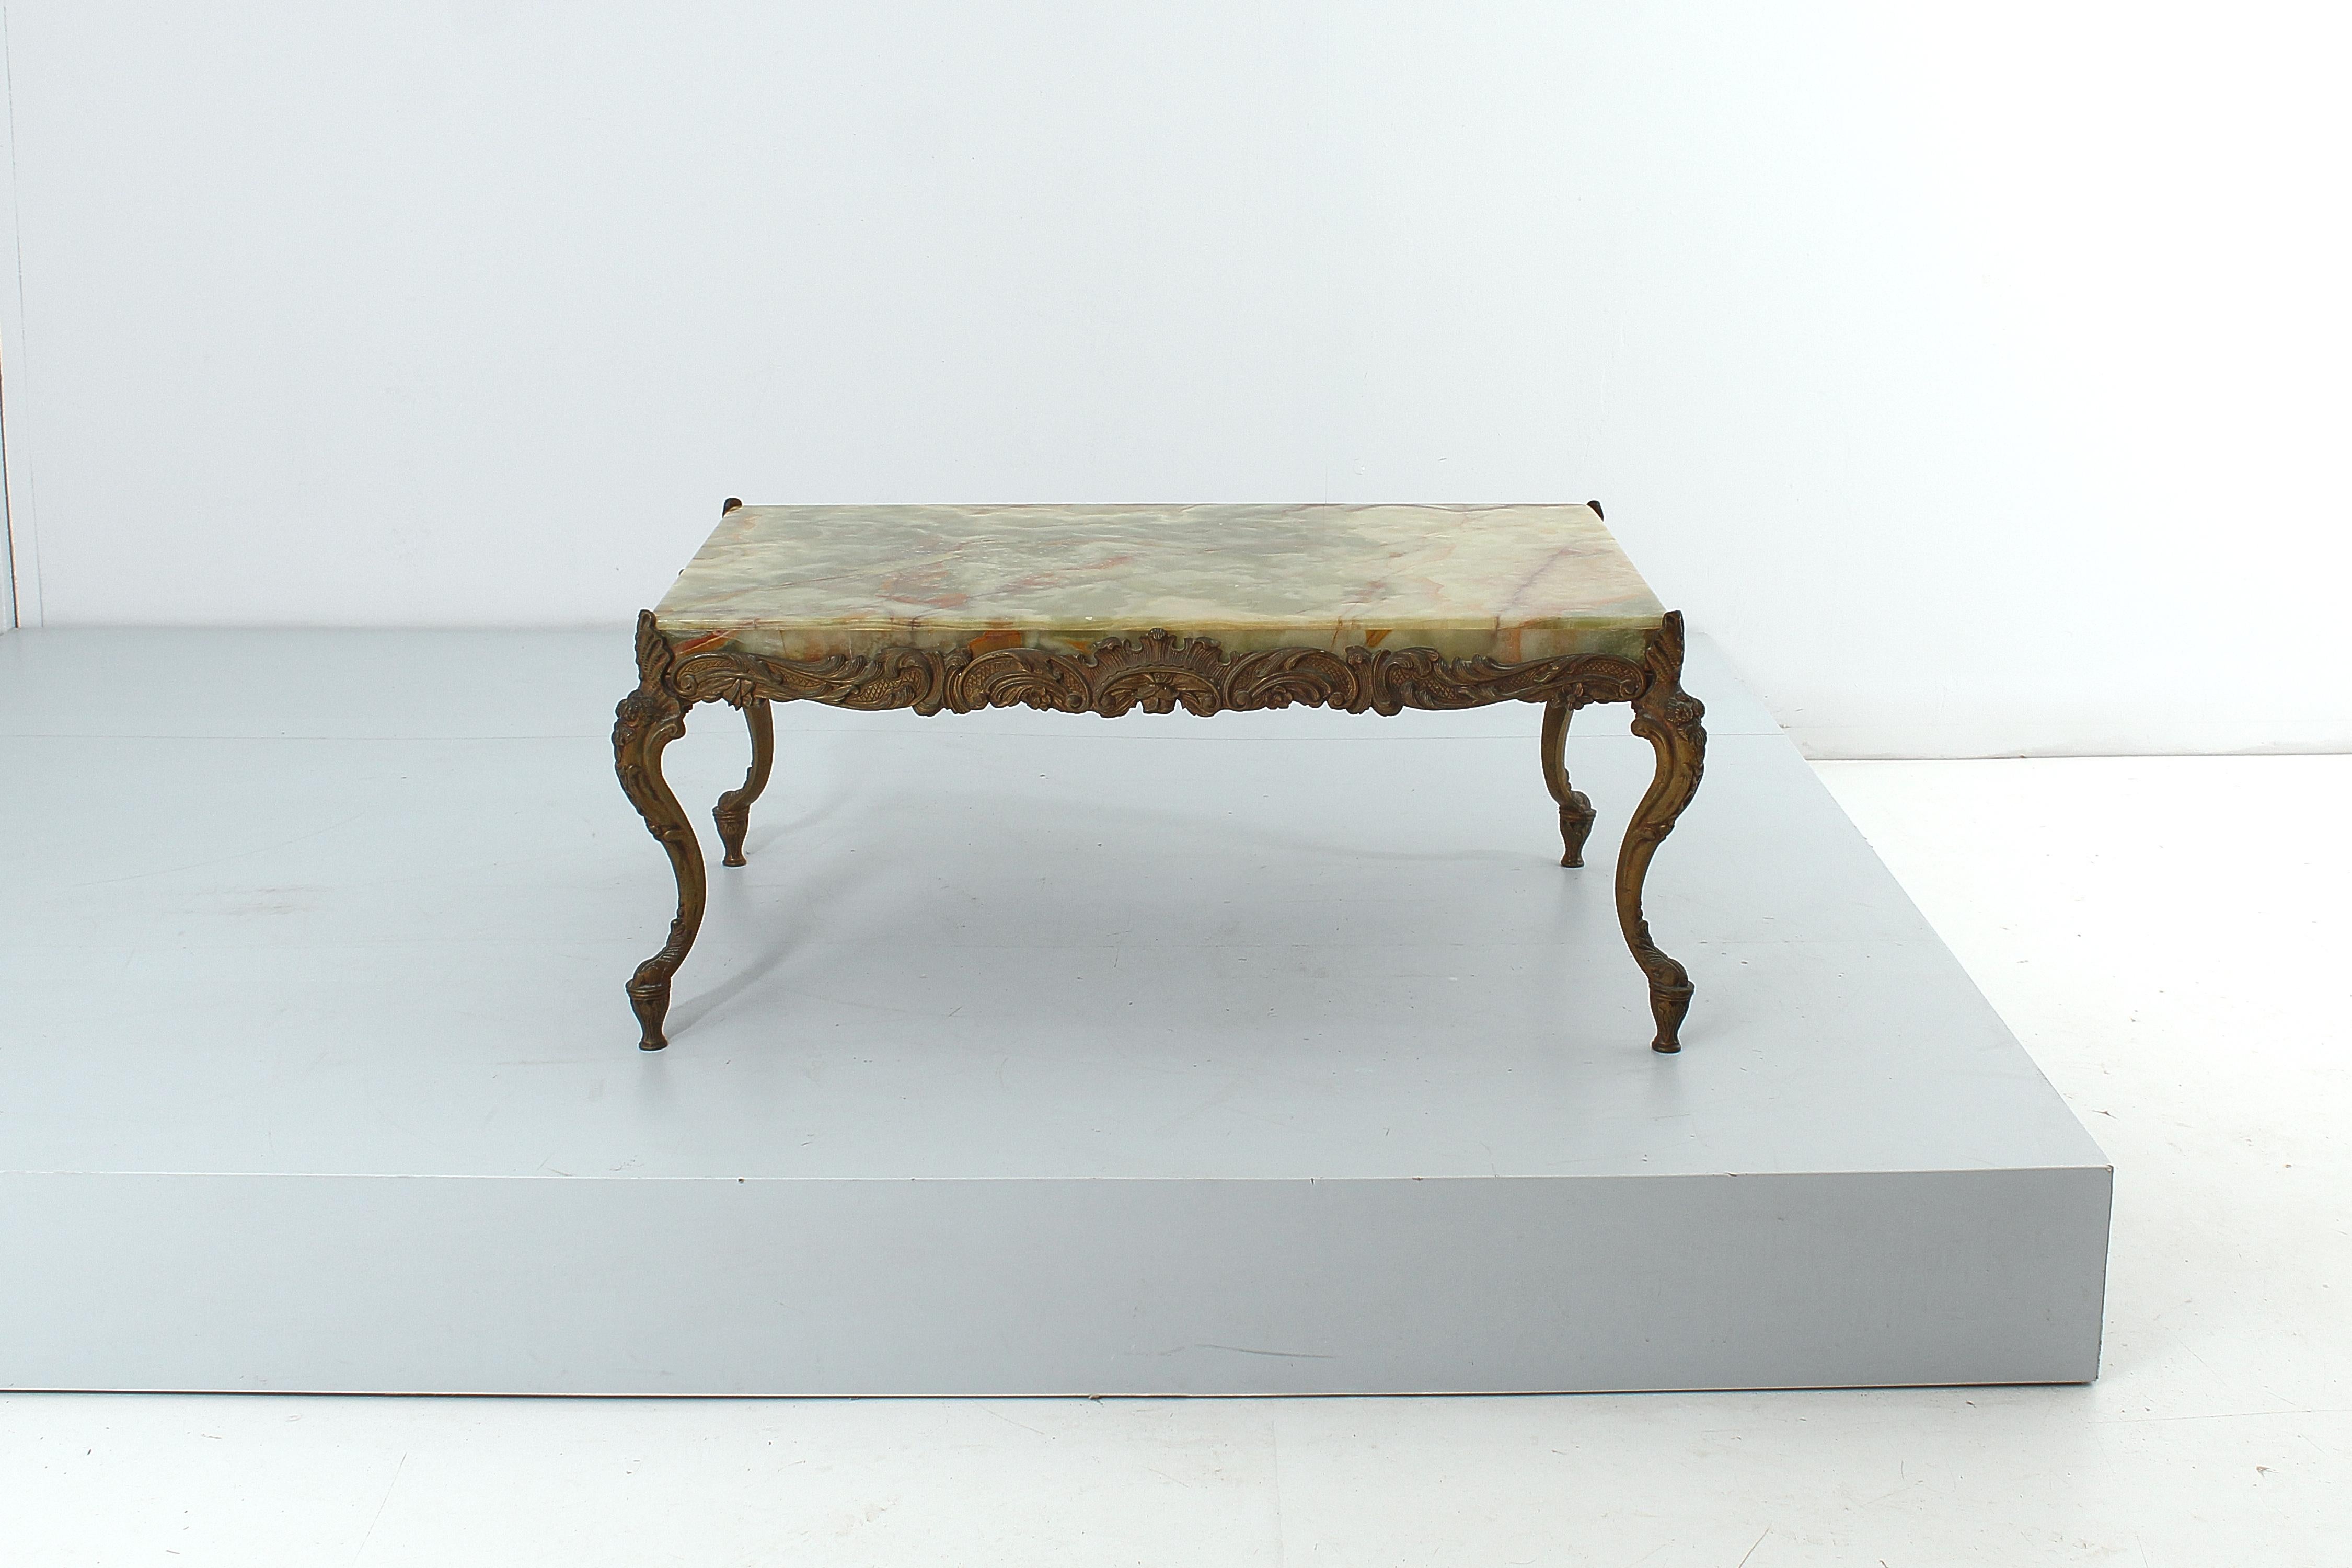 Rectangular Chippendale style coffee table with onyx top and bronze structure with relief decorations. Italian manufacture, 1950s. 
Wear consistent with age and use.